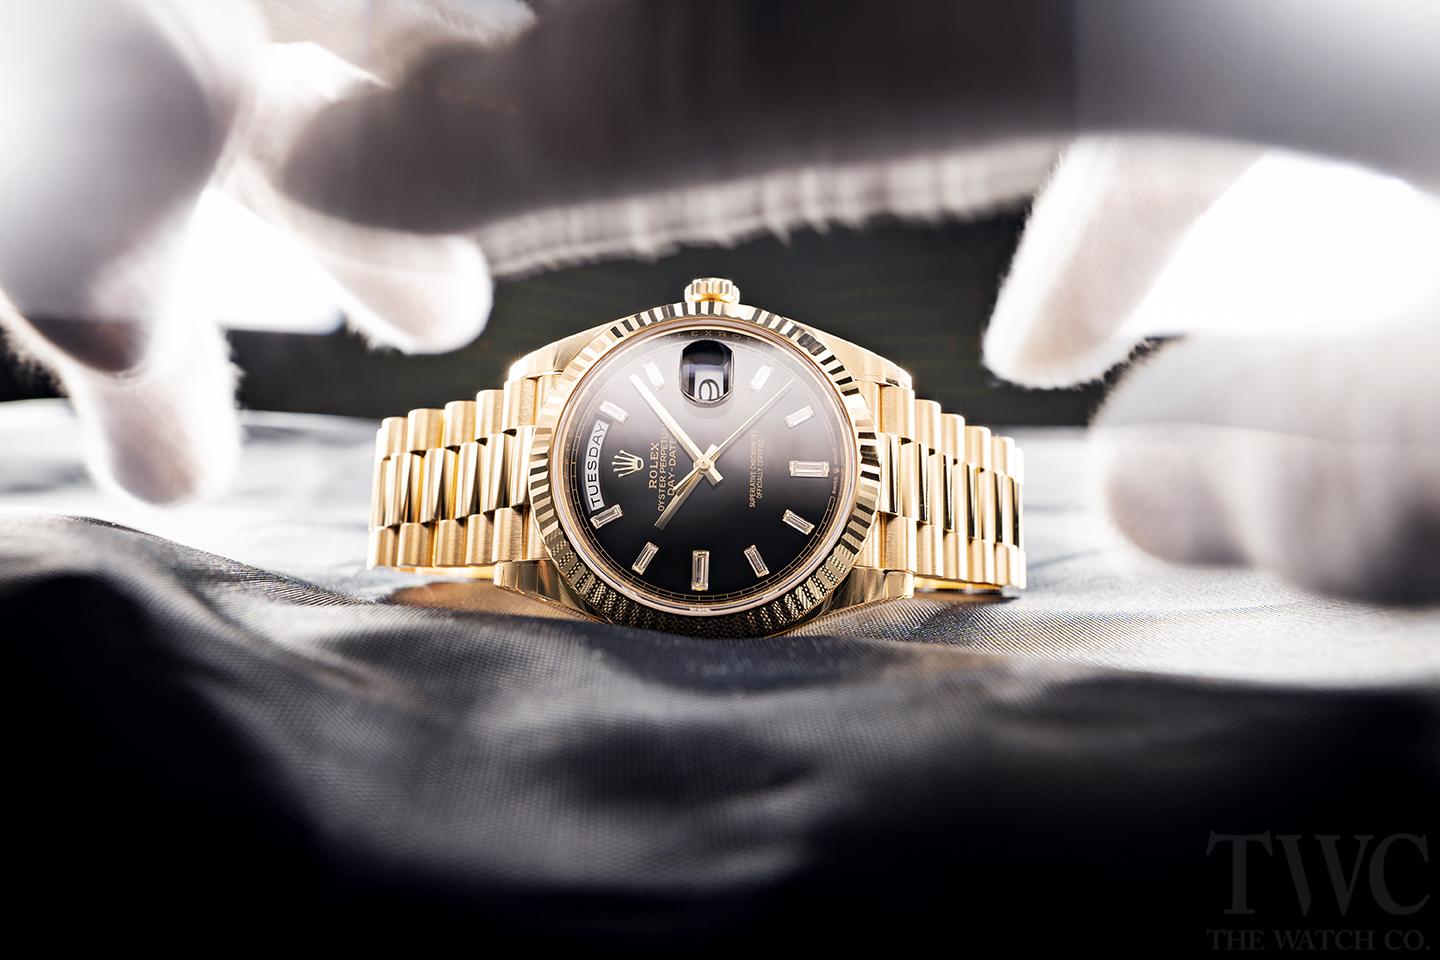 7 Reasons Why Rolex Watches Are So Expensive